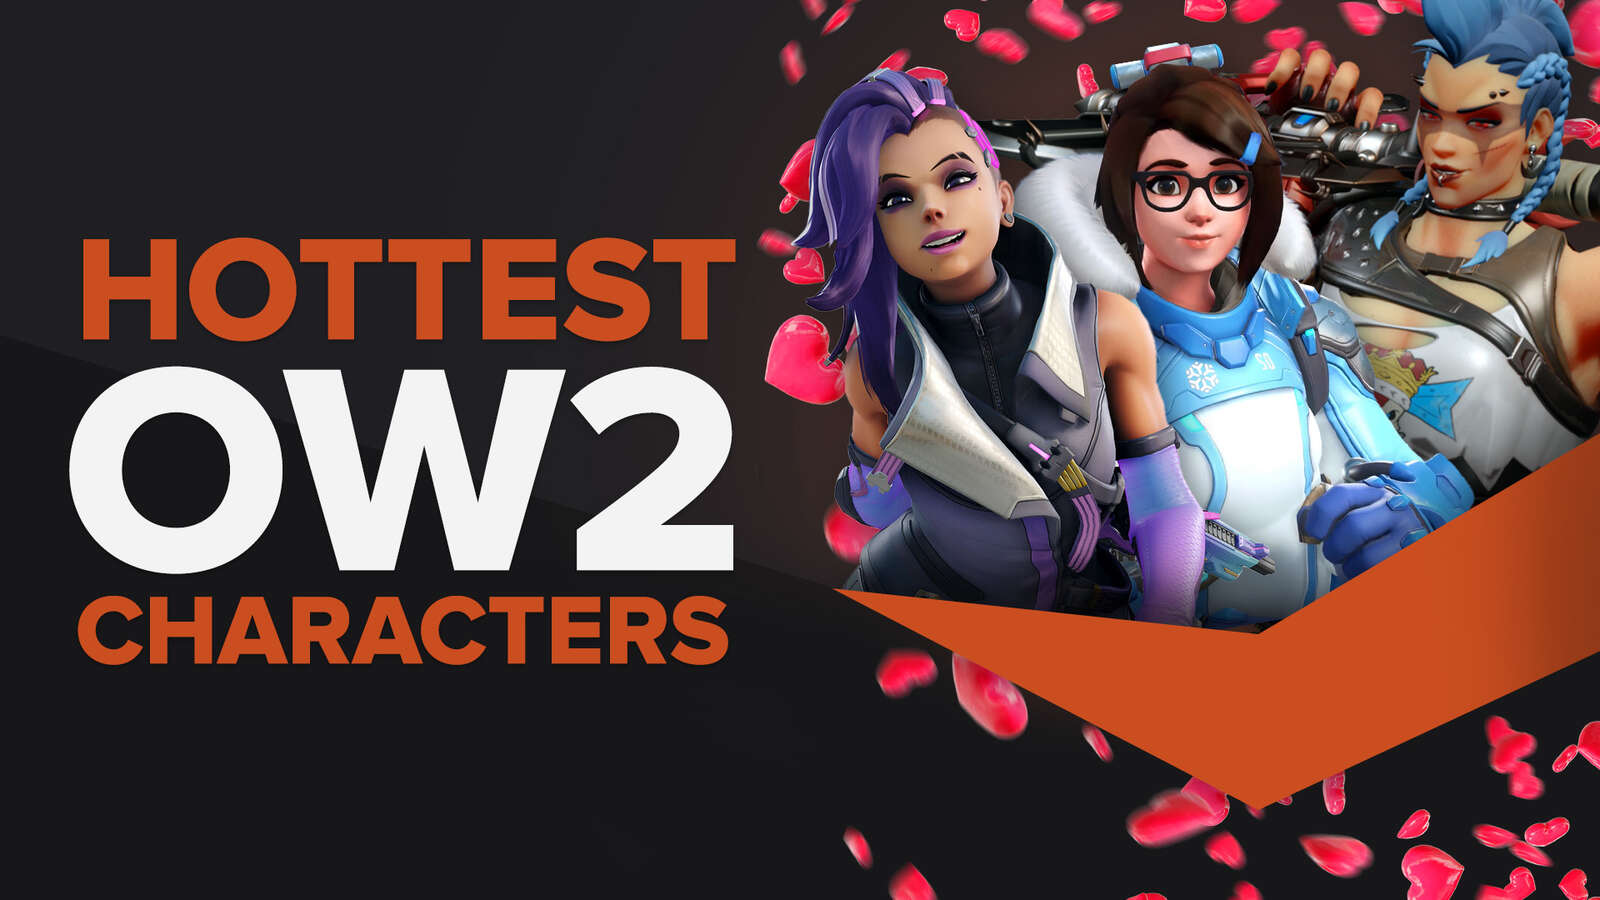 The Hottest Characters in Overwatch 2